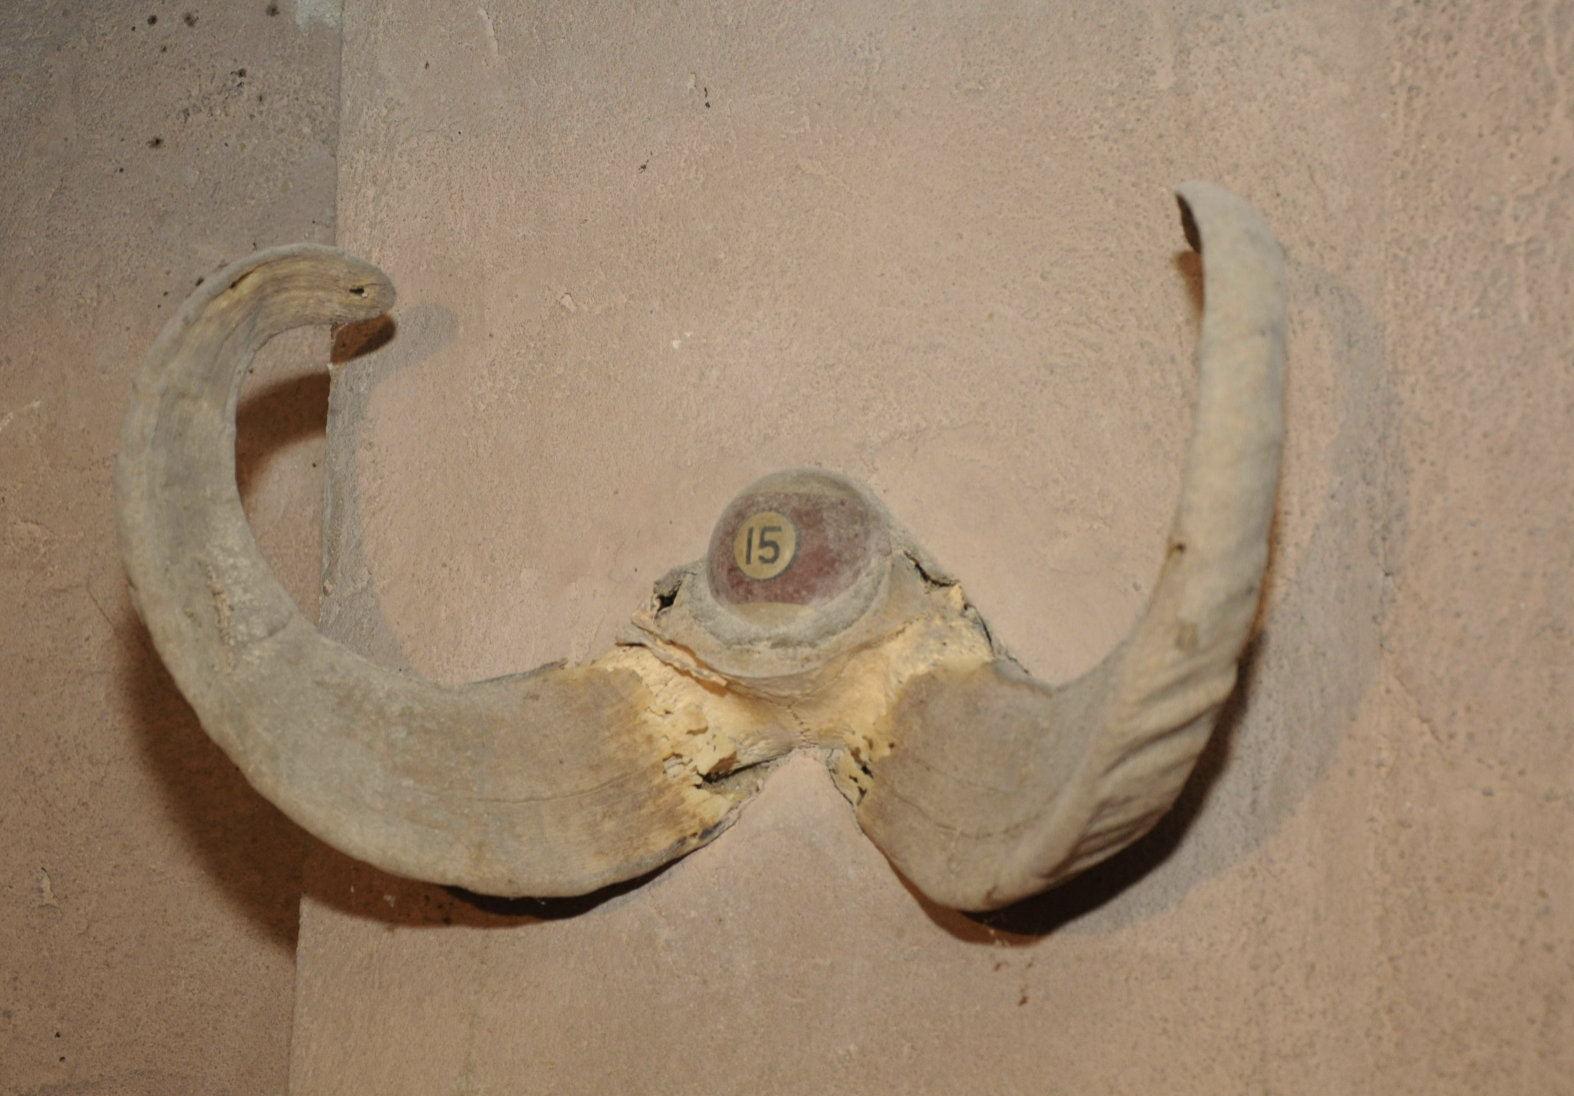 A dusty billiard ball attached to dusty horns emerging from a wall